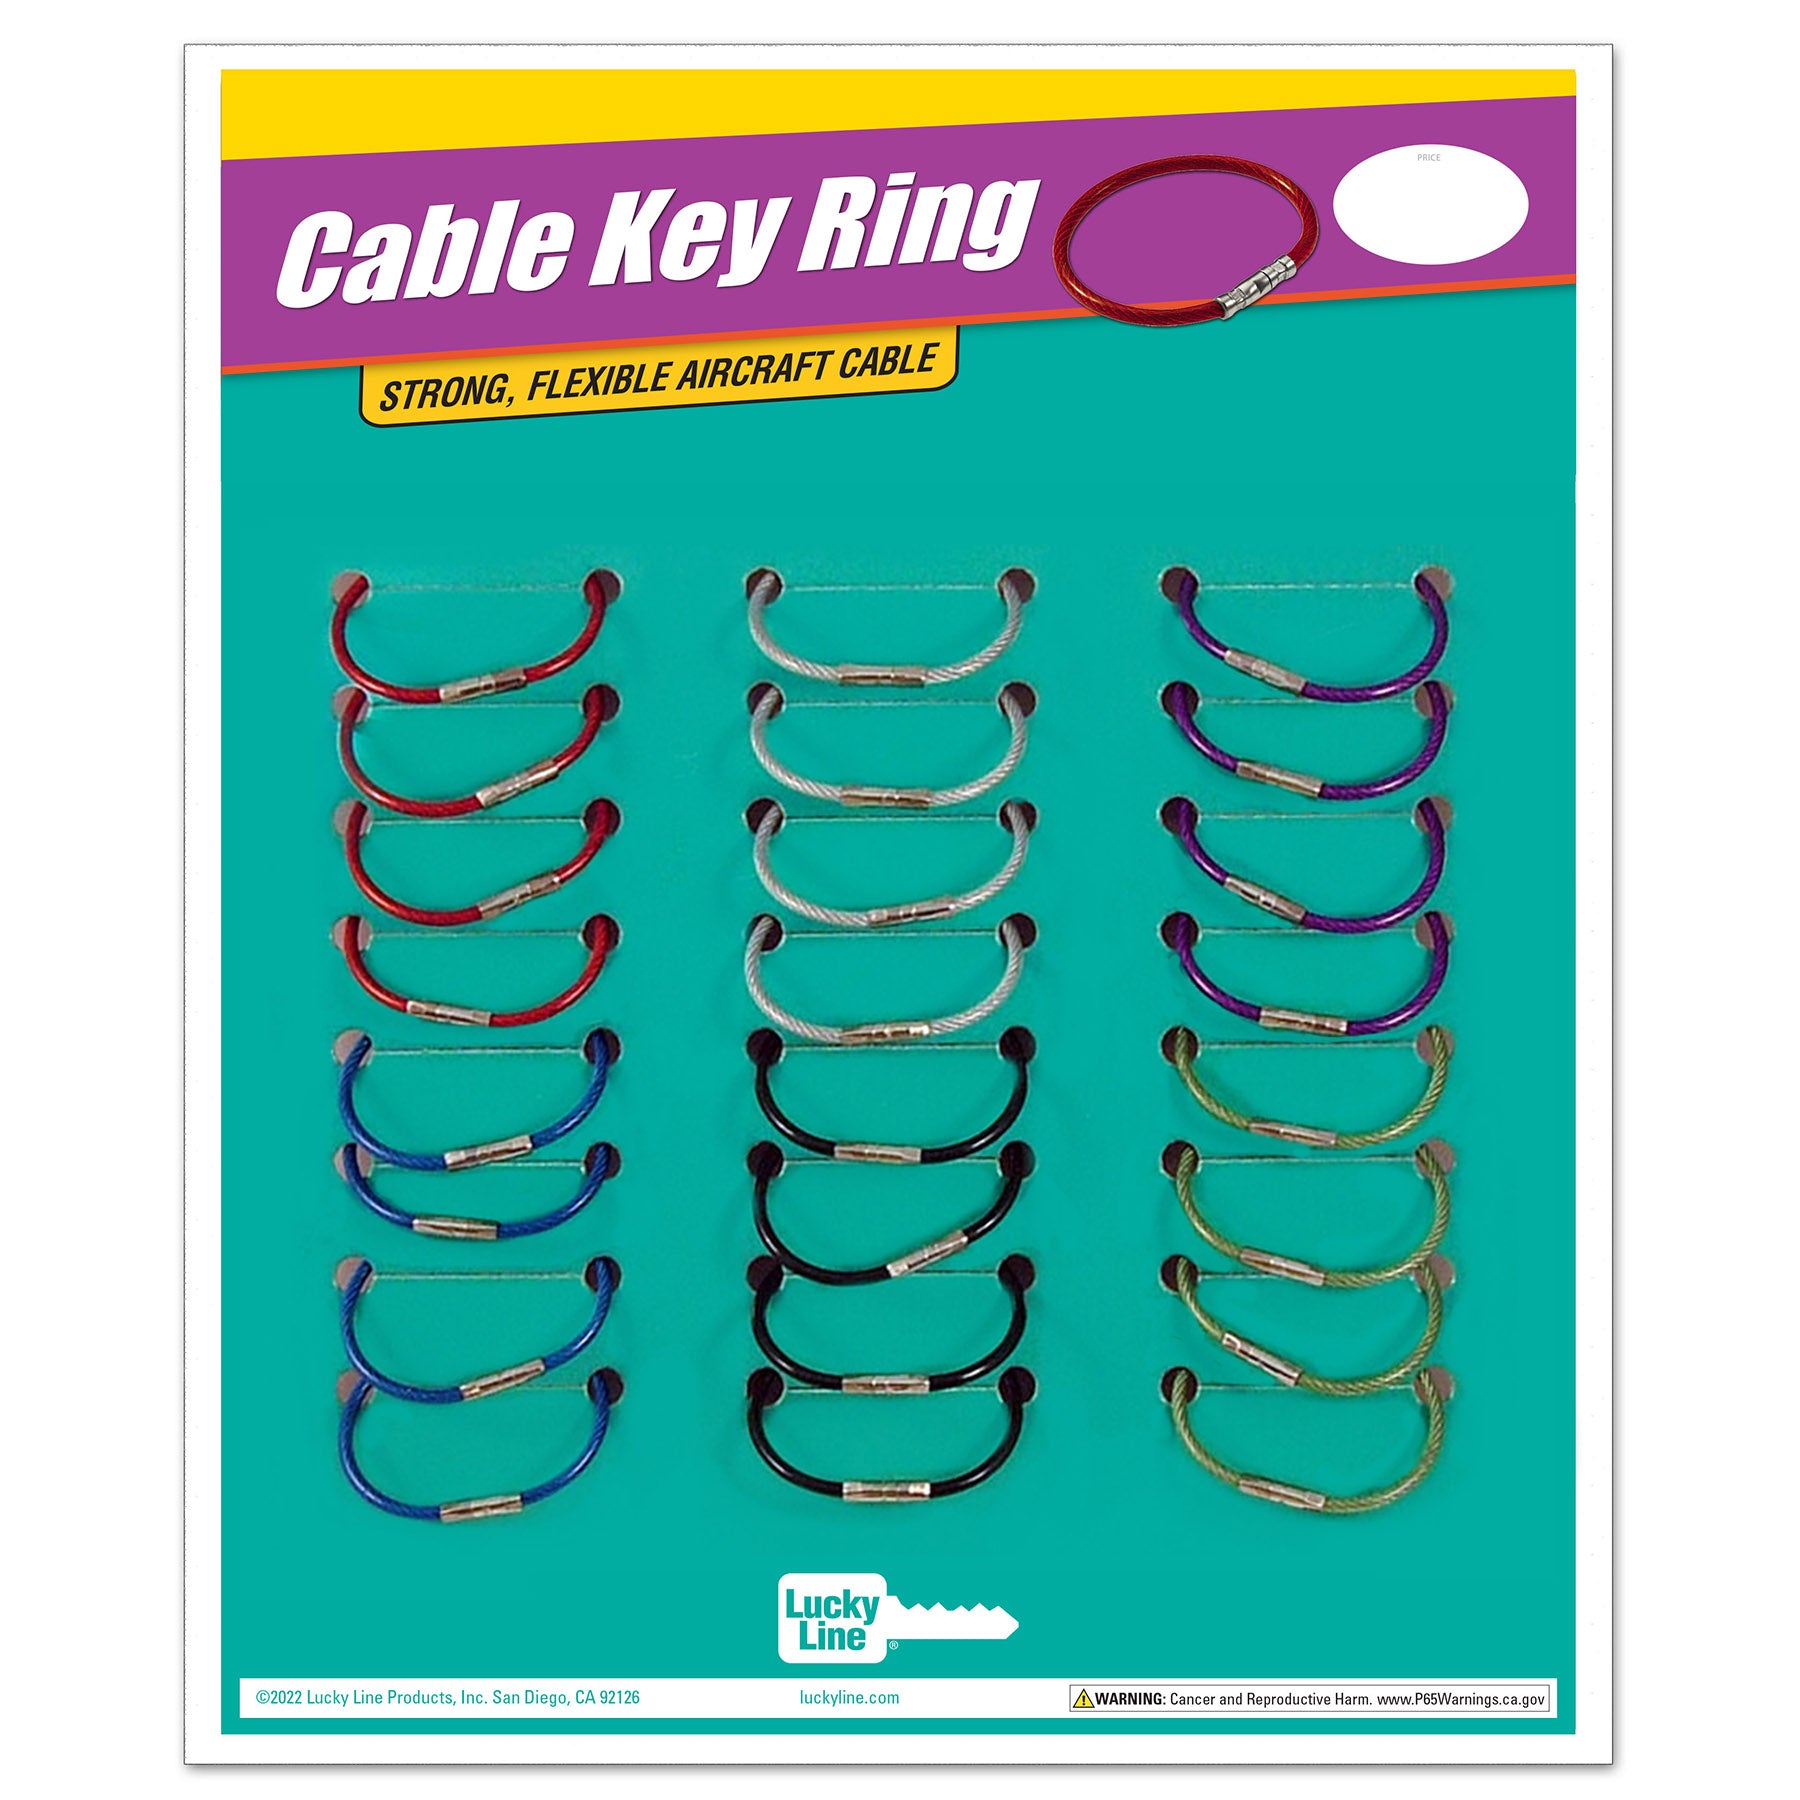 Lucky Line 4-1/2 Locking Cable Key Ring, Crimp to Permanently Close, Nylon Coated Steel Wire, Corrosion-Resistant, 25 Pack, Assorted (80800)